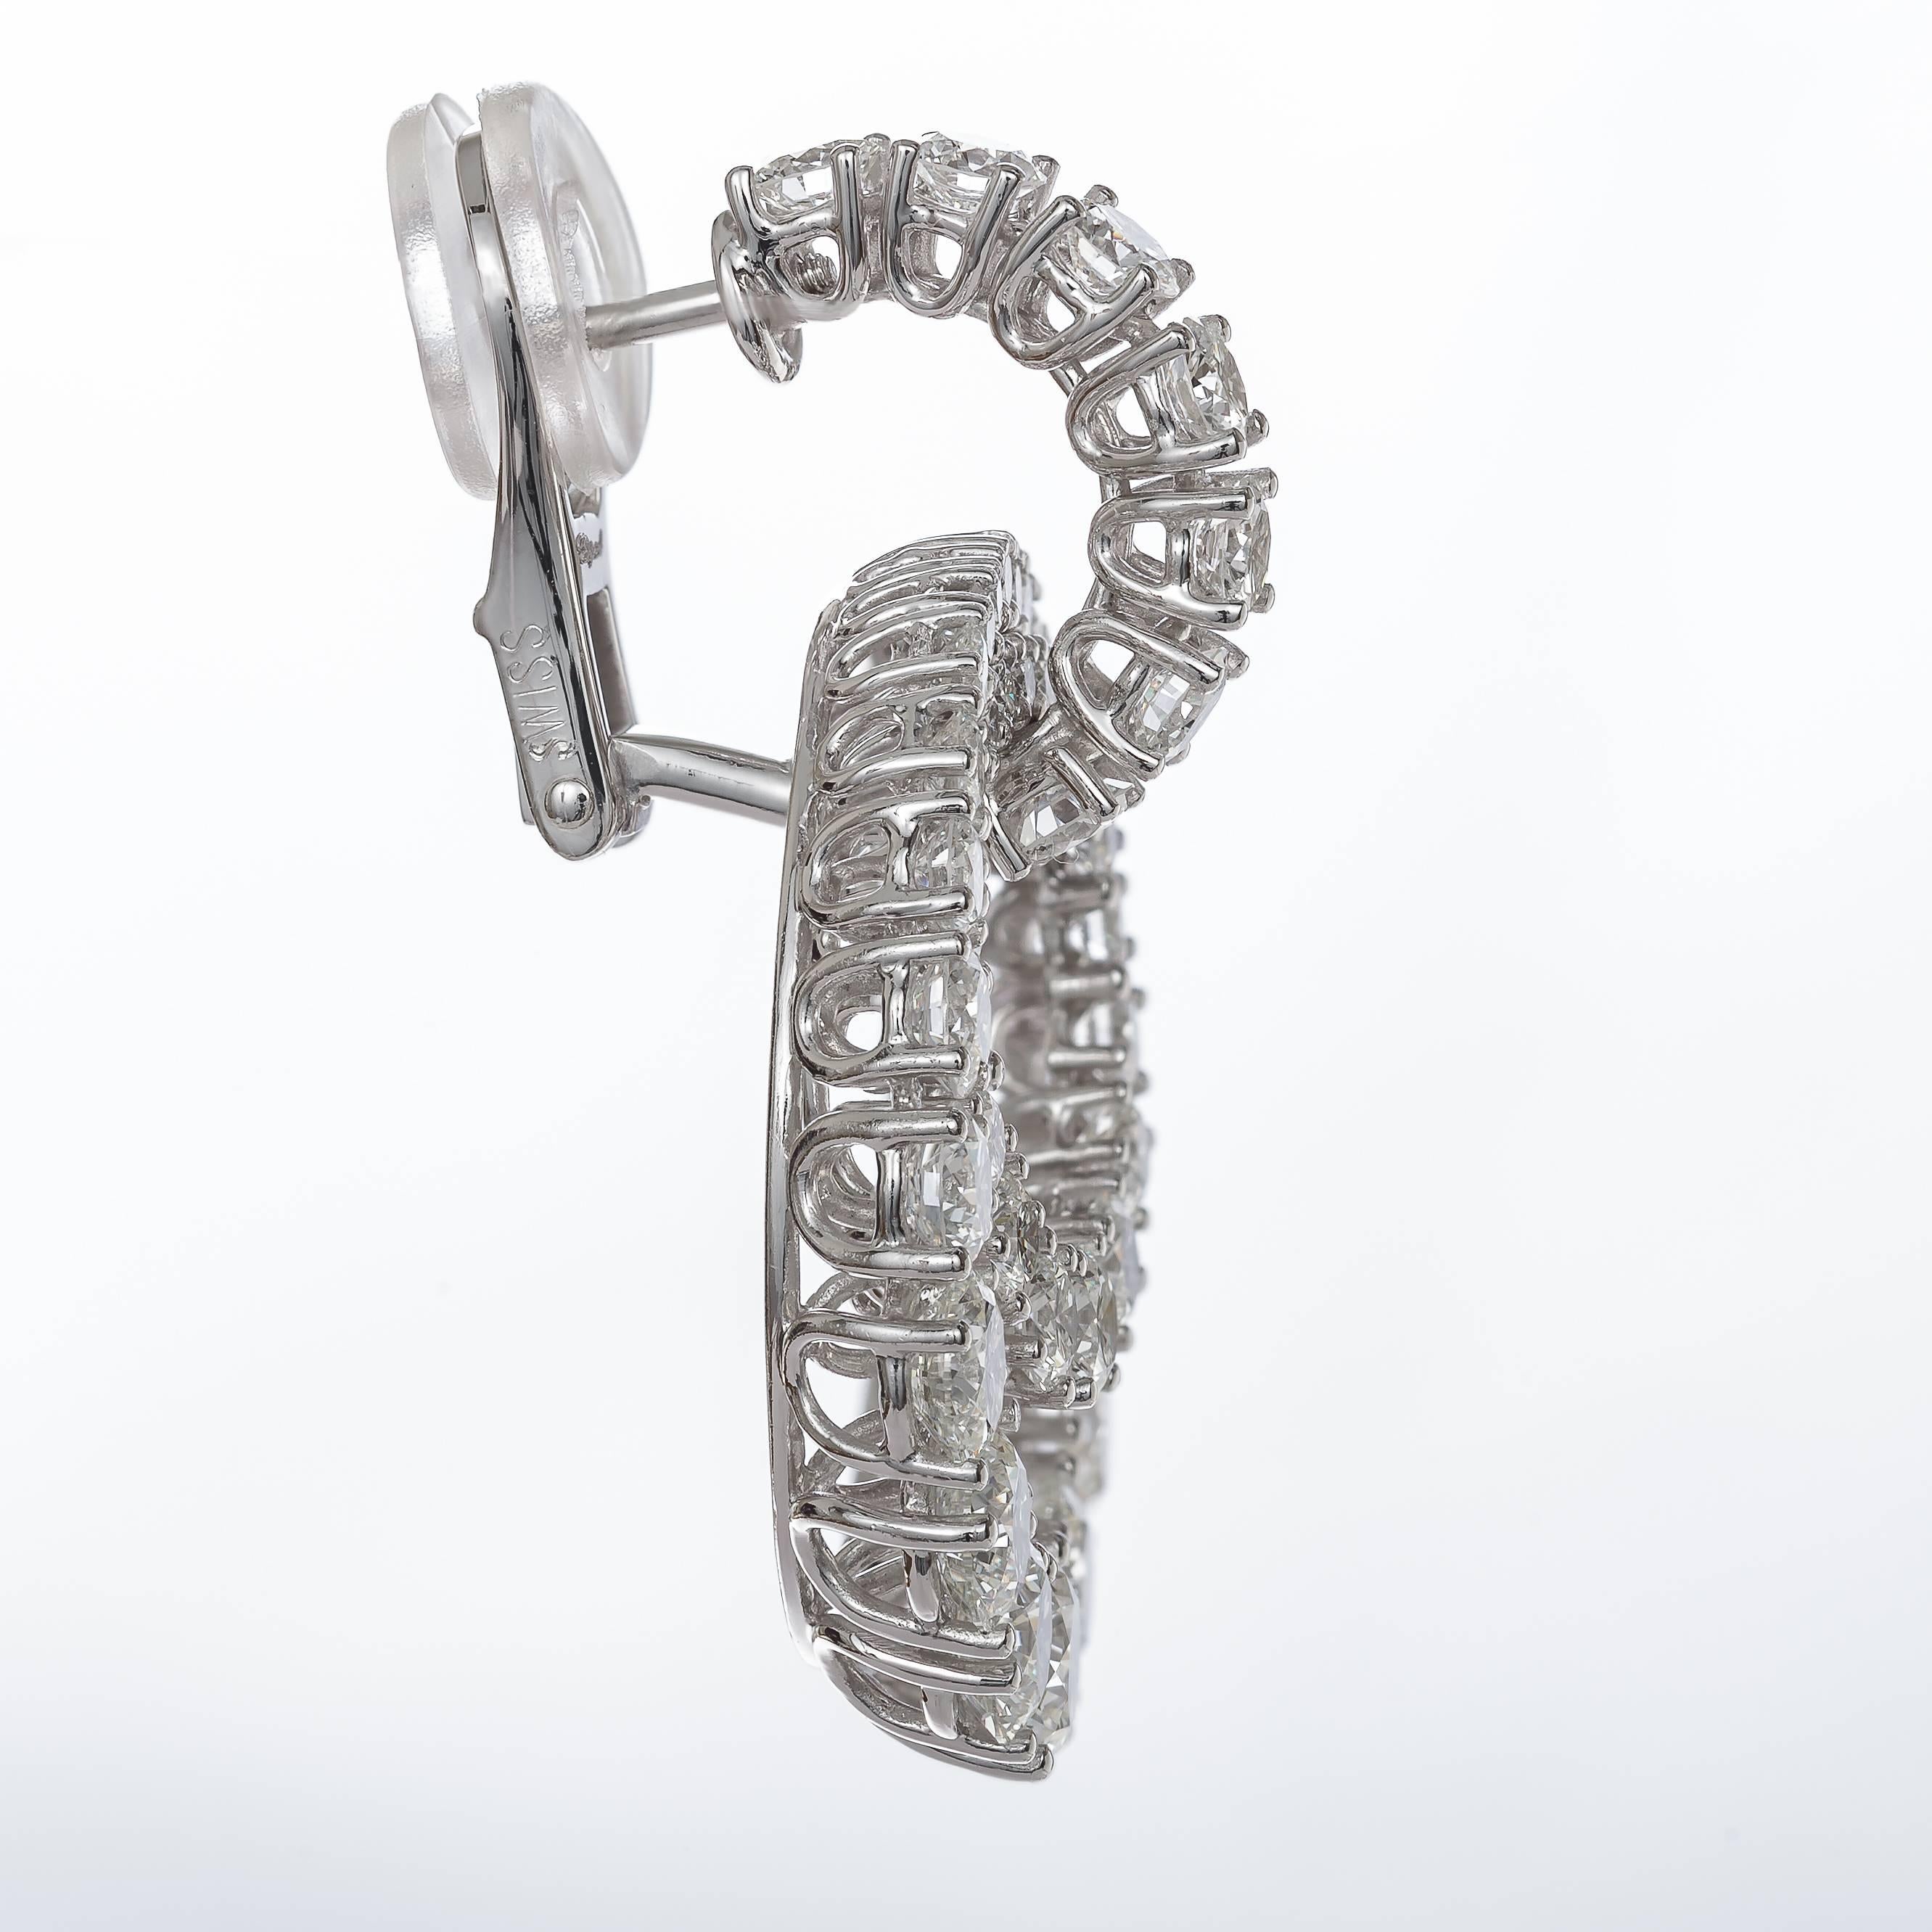 These stunning 18k white gold leverback Chopard earrings for pierced ears are set with 98 round brilliant diamonds in varying sizes, totaling 9.40 carats of  diamonds. Chopard uses F-G color VVS1-VS1 clarity diamonds. The earrings are in excellent